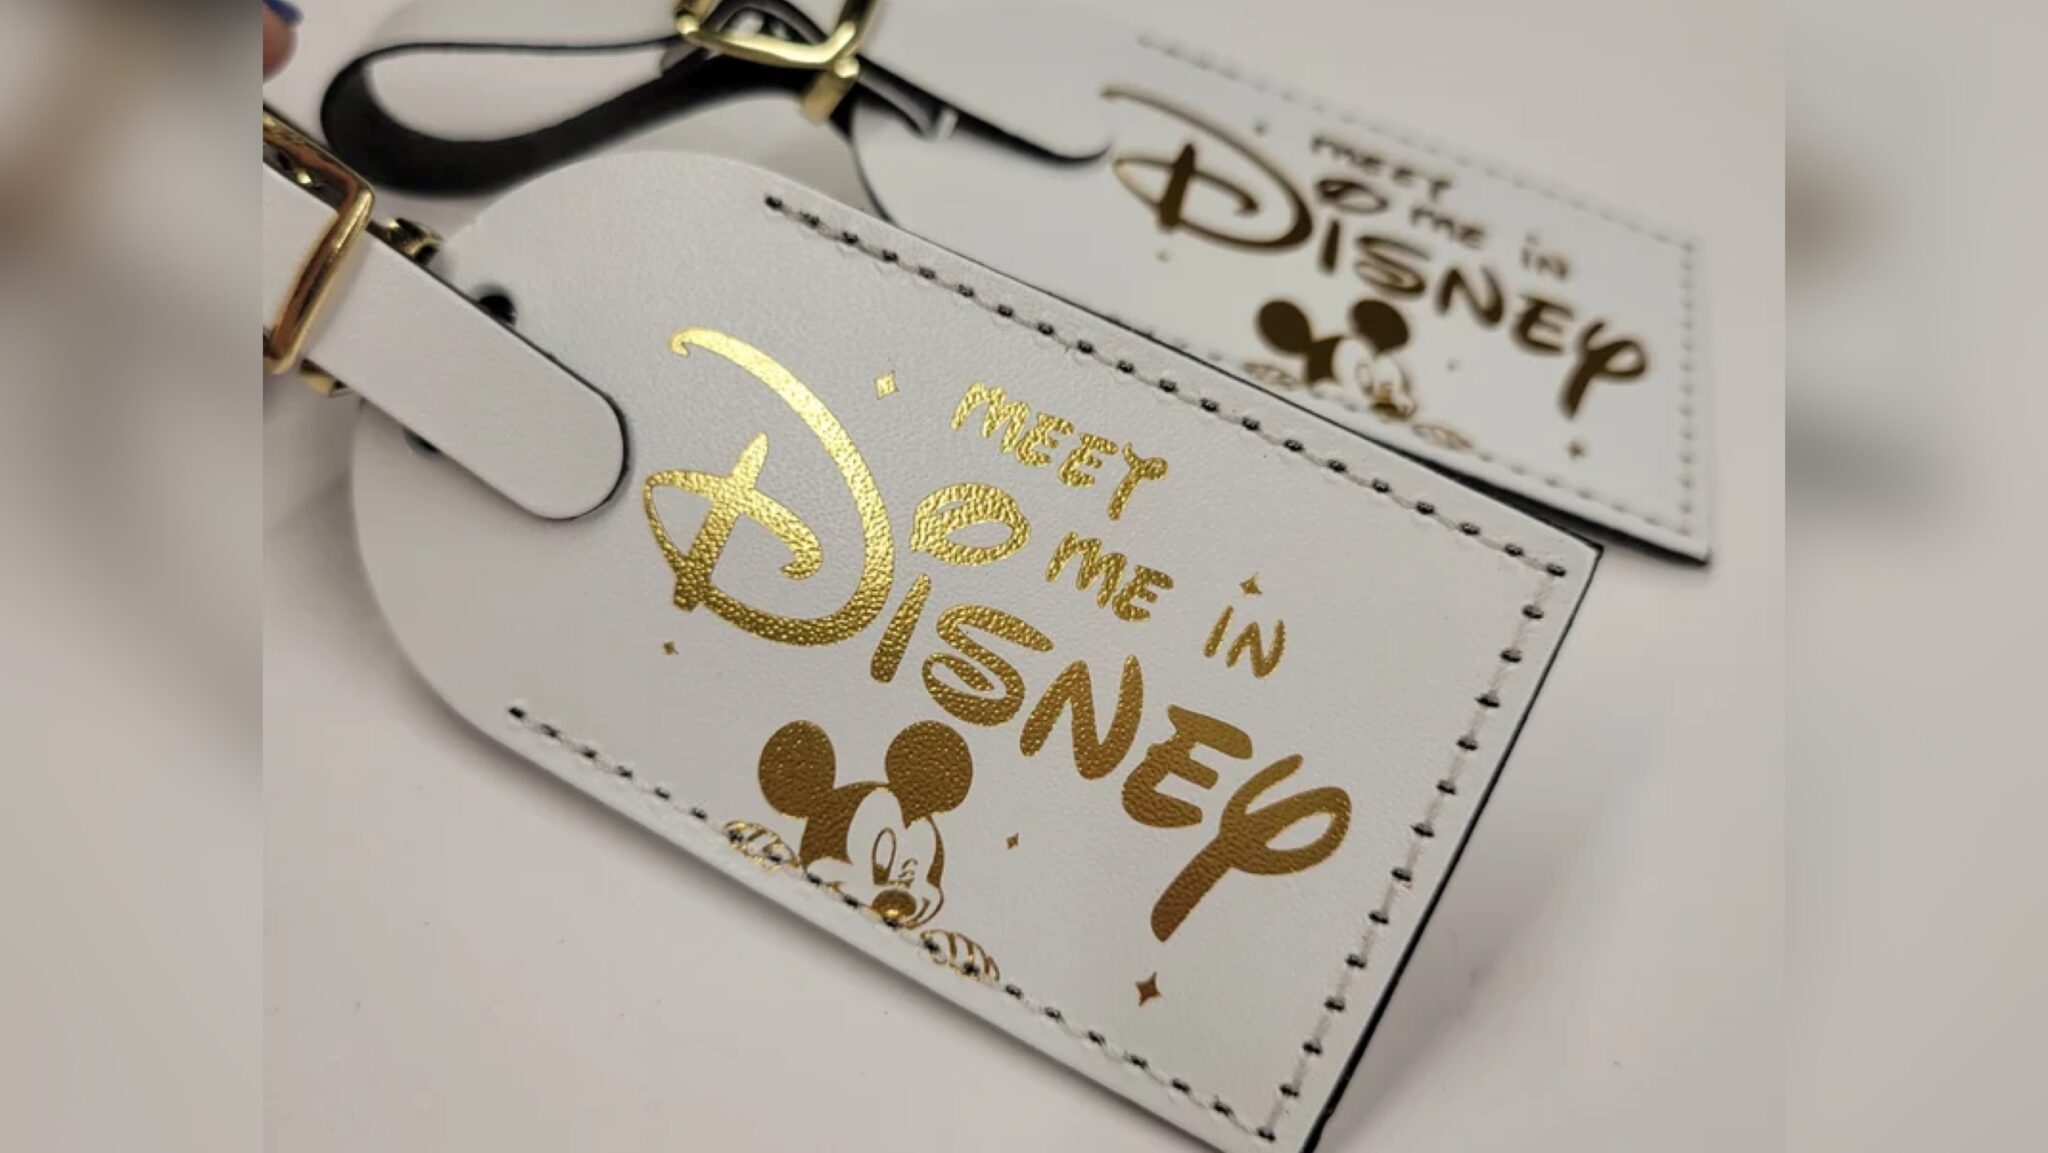 Mickey Mouse Luggage Tag For Just Next Disney Vacation! | Chip and Company